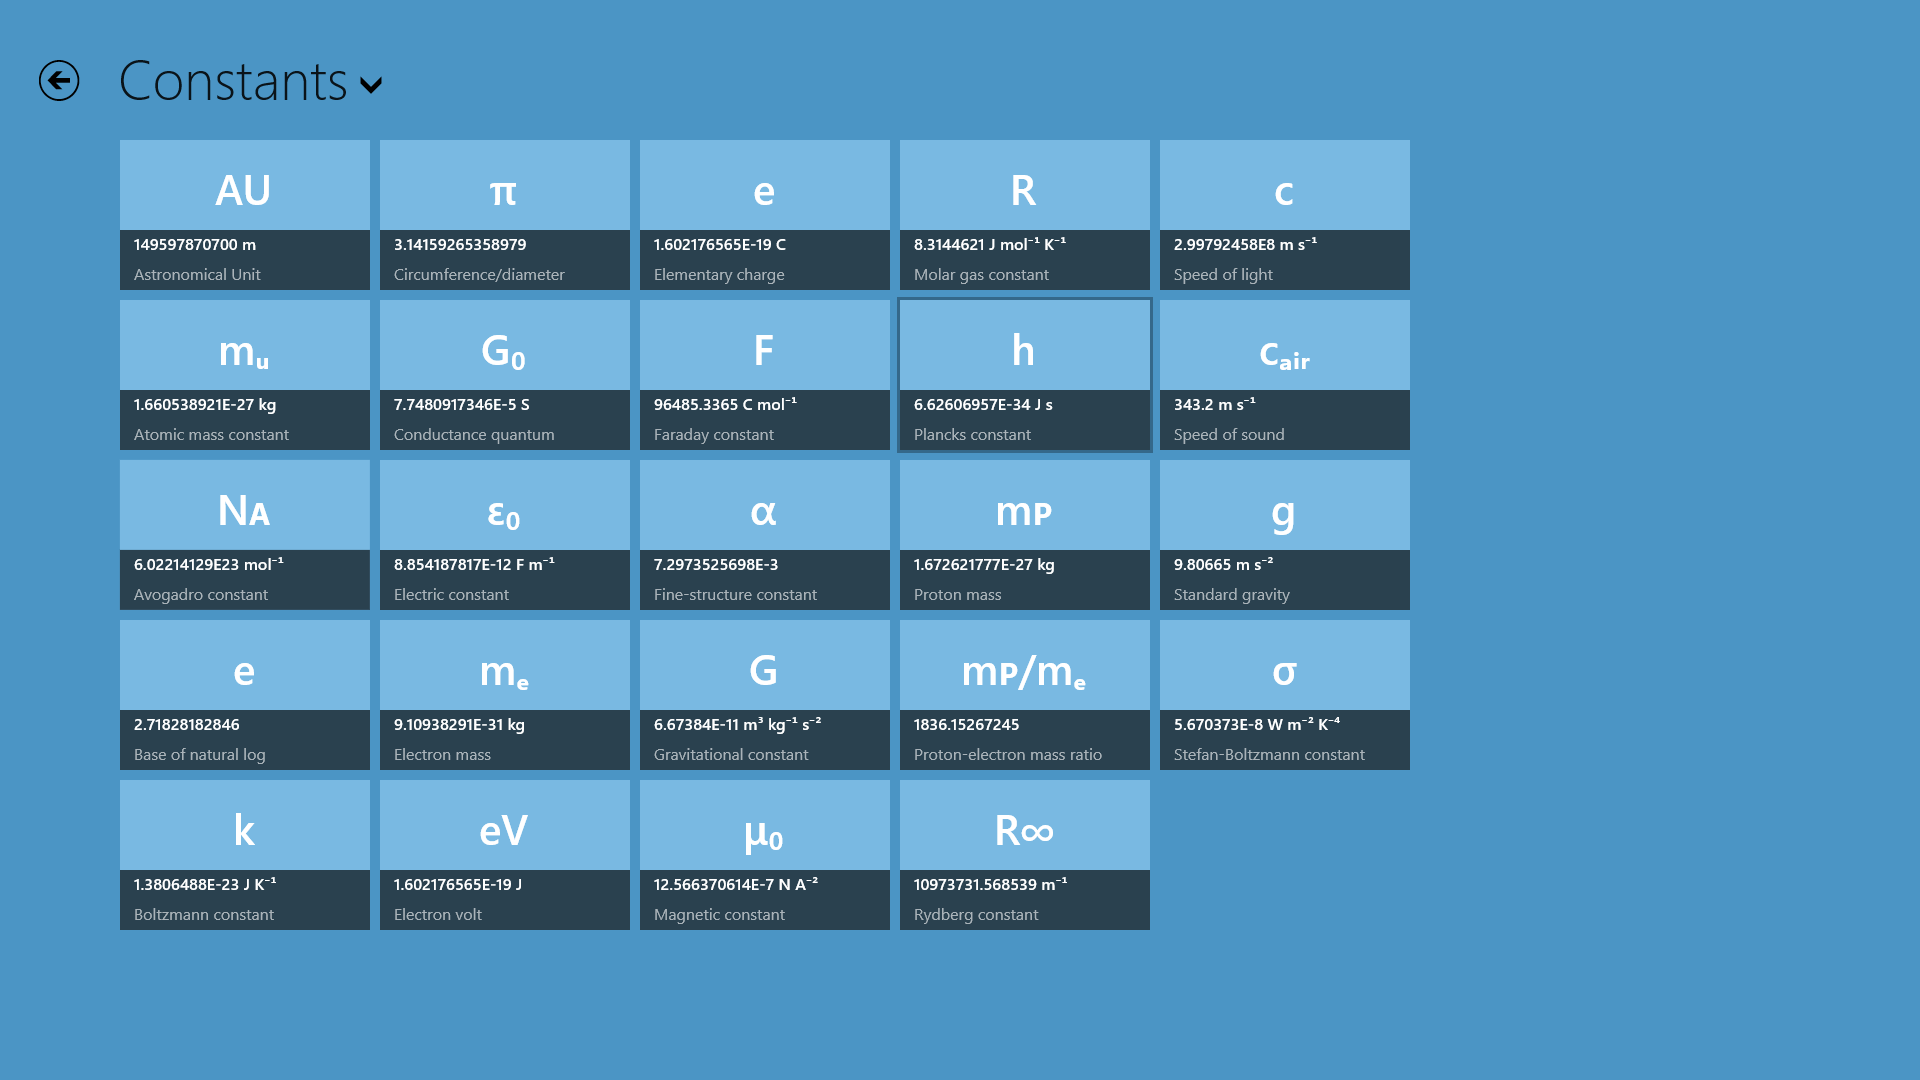 Over 20 of the most commonly used constants